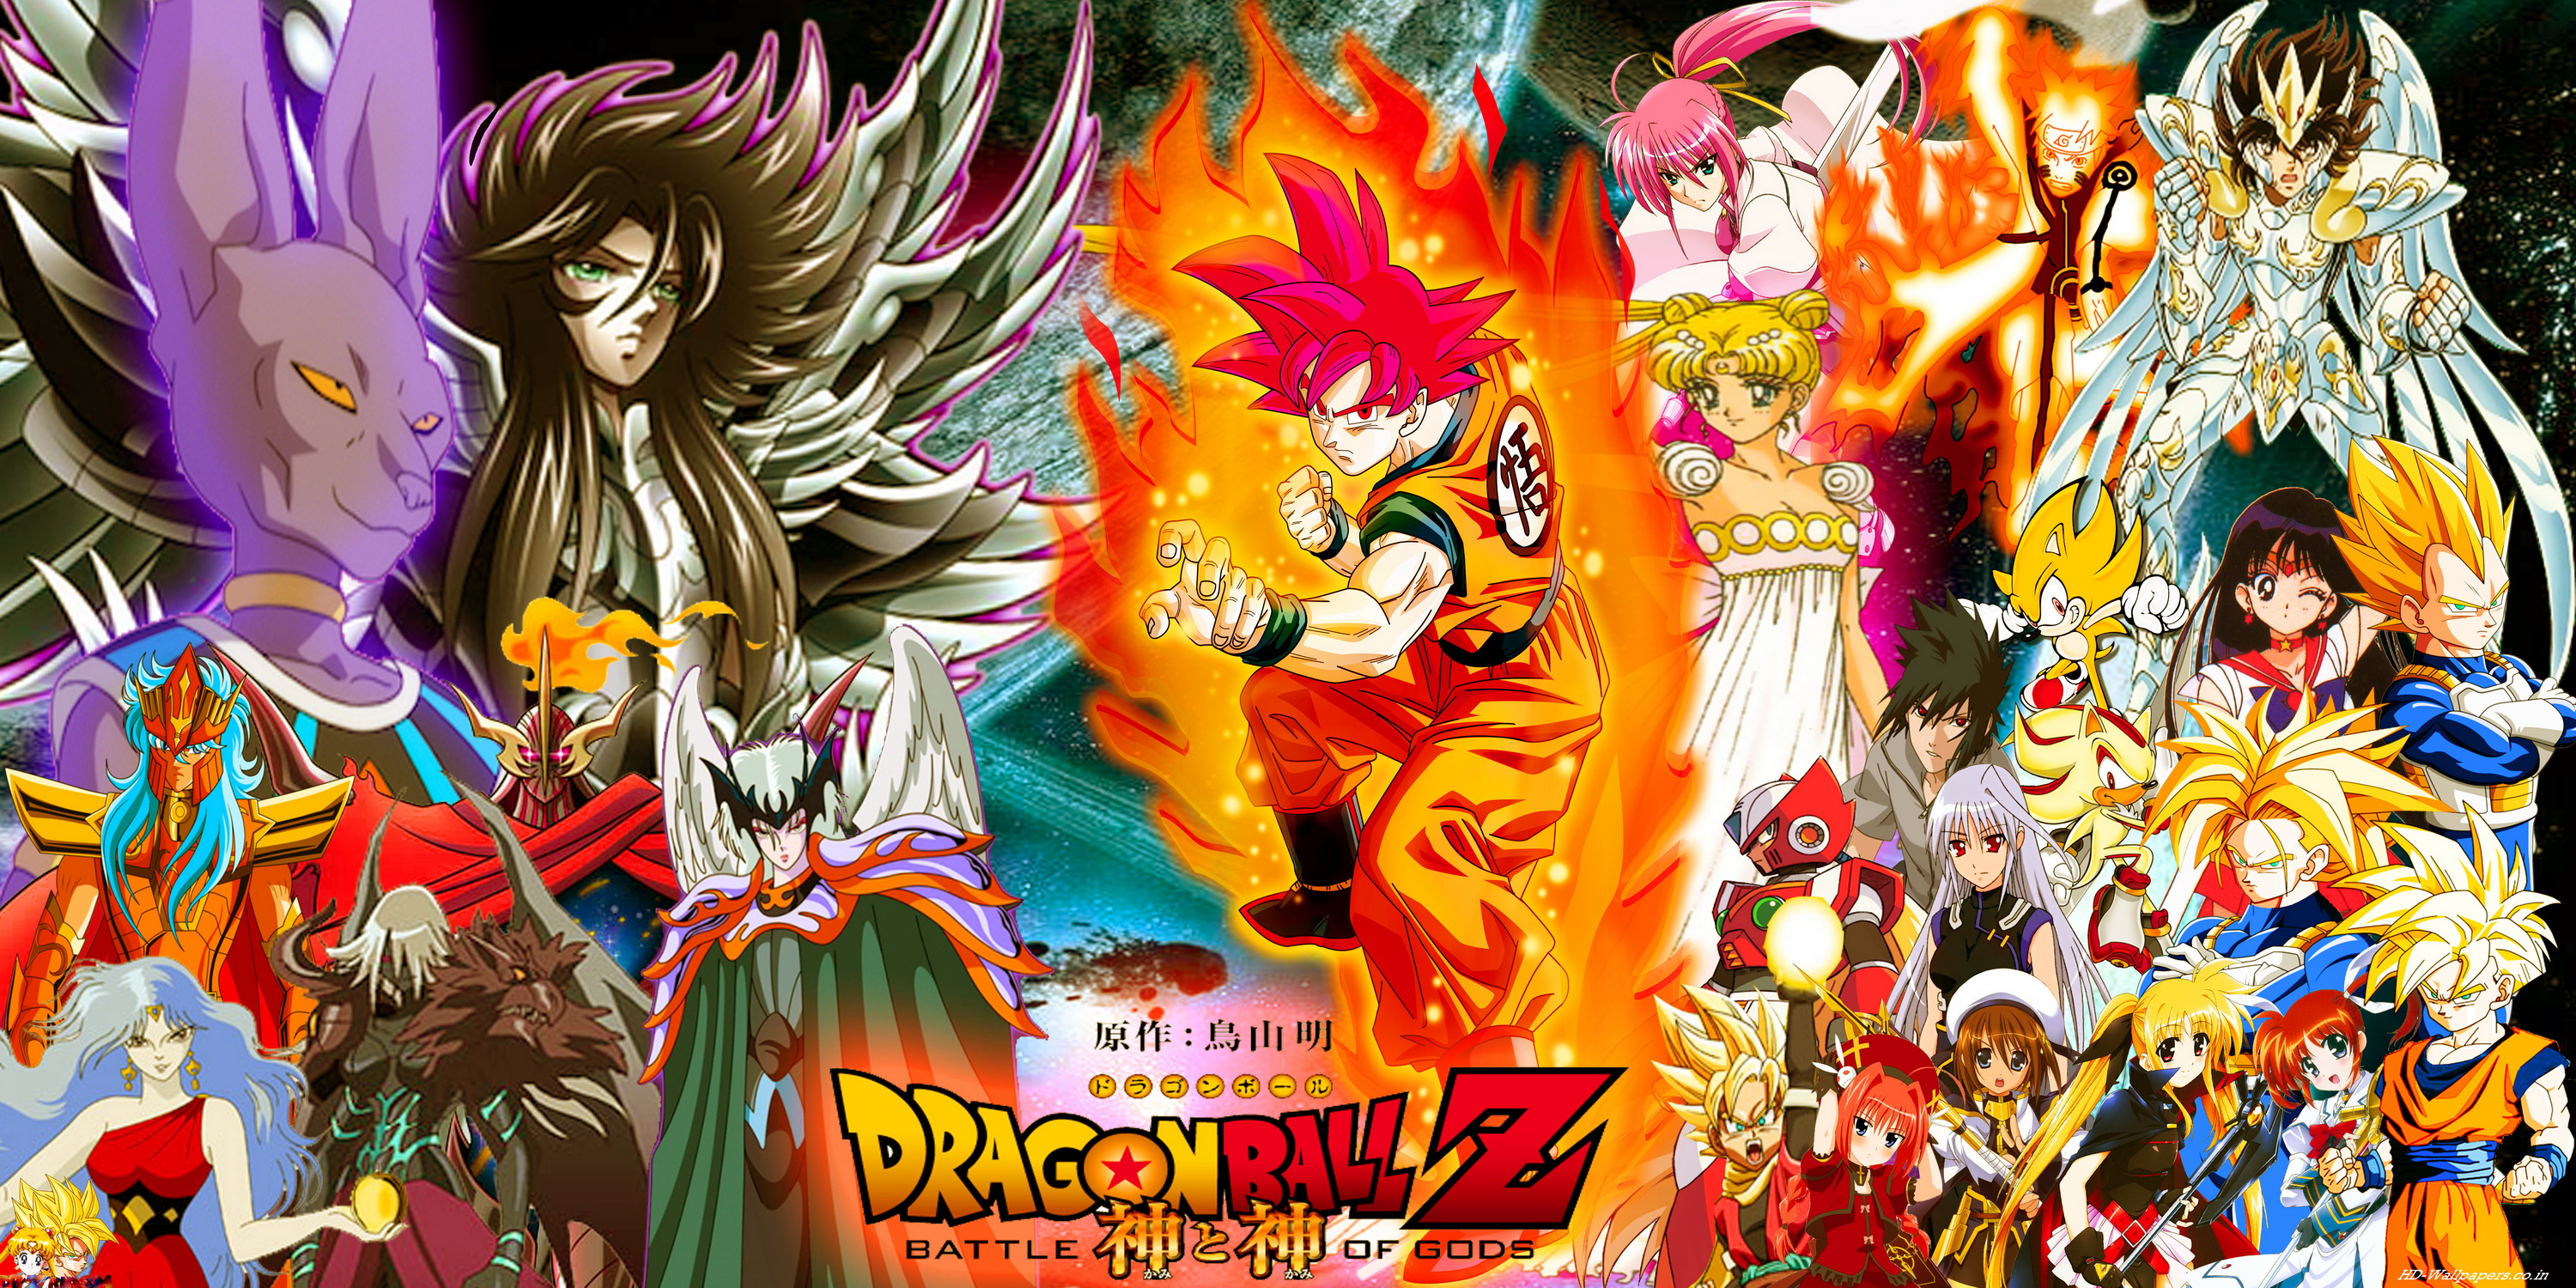 Dragon Ball Z Wallpaper Pictures Image